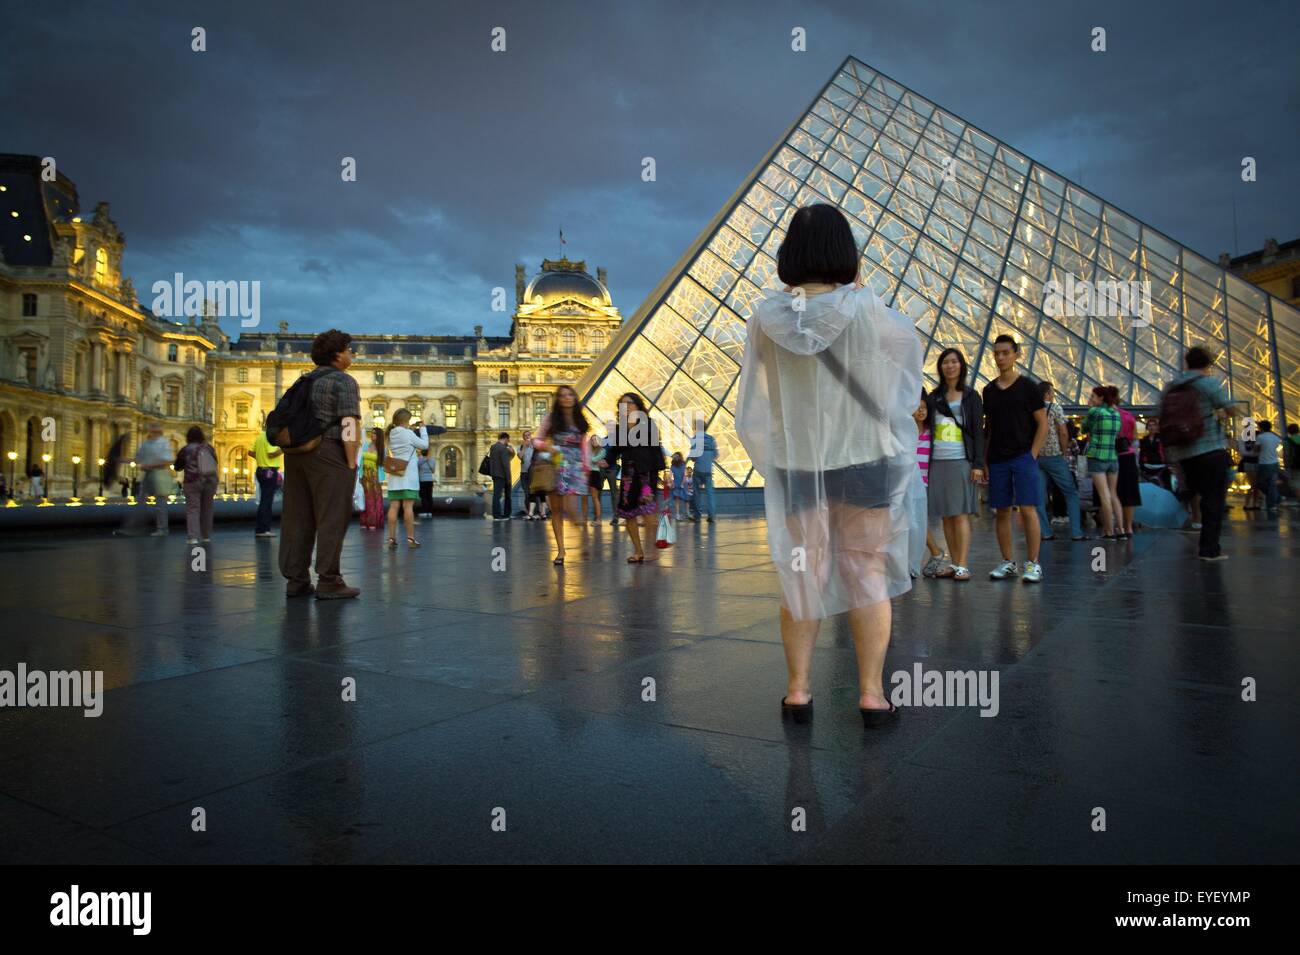 The masterwork of Ming Pei and the tourists during a rainy day in summer 2012. 03/08/2012 - Sylvain Leser Stock Photo